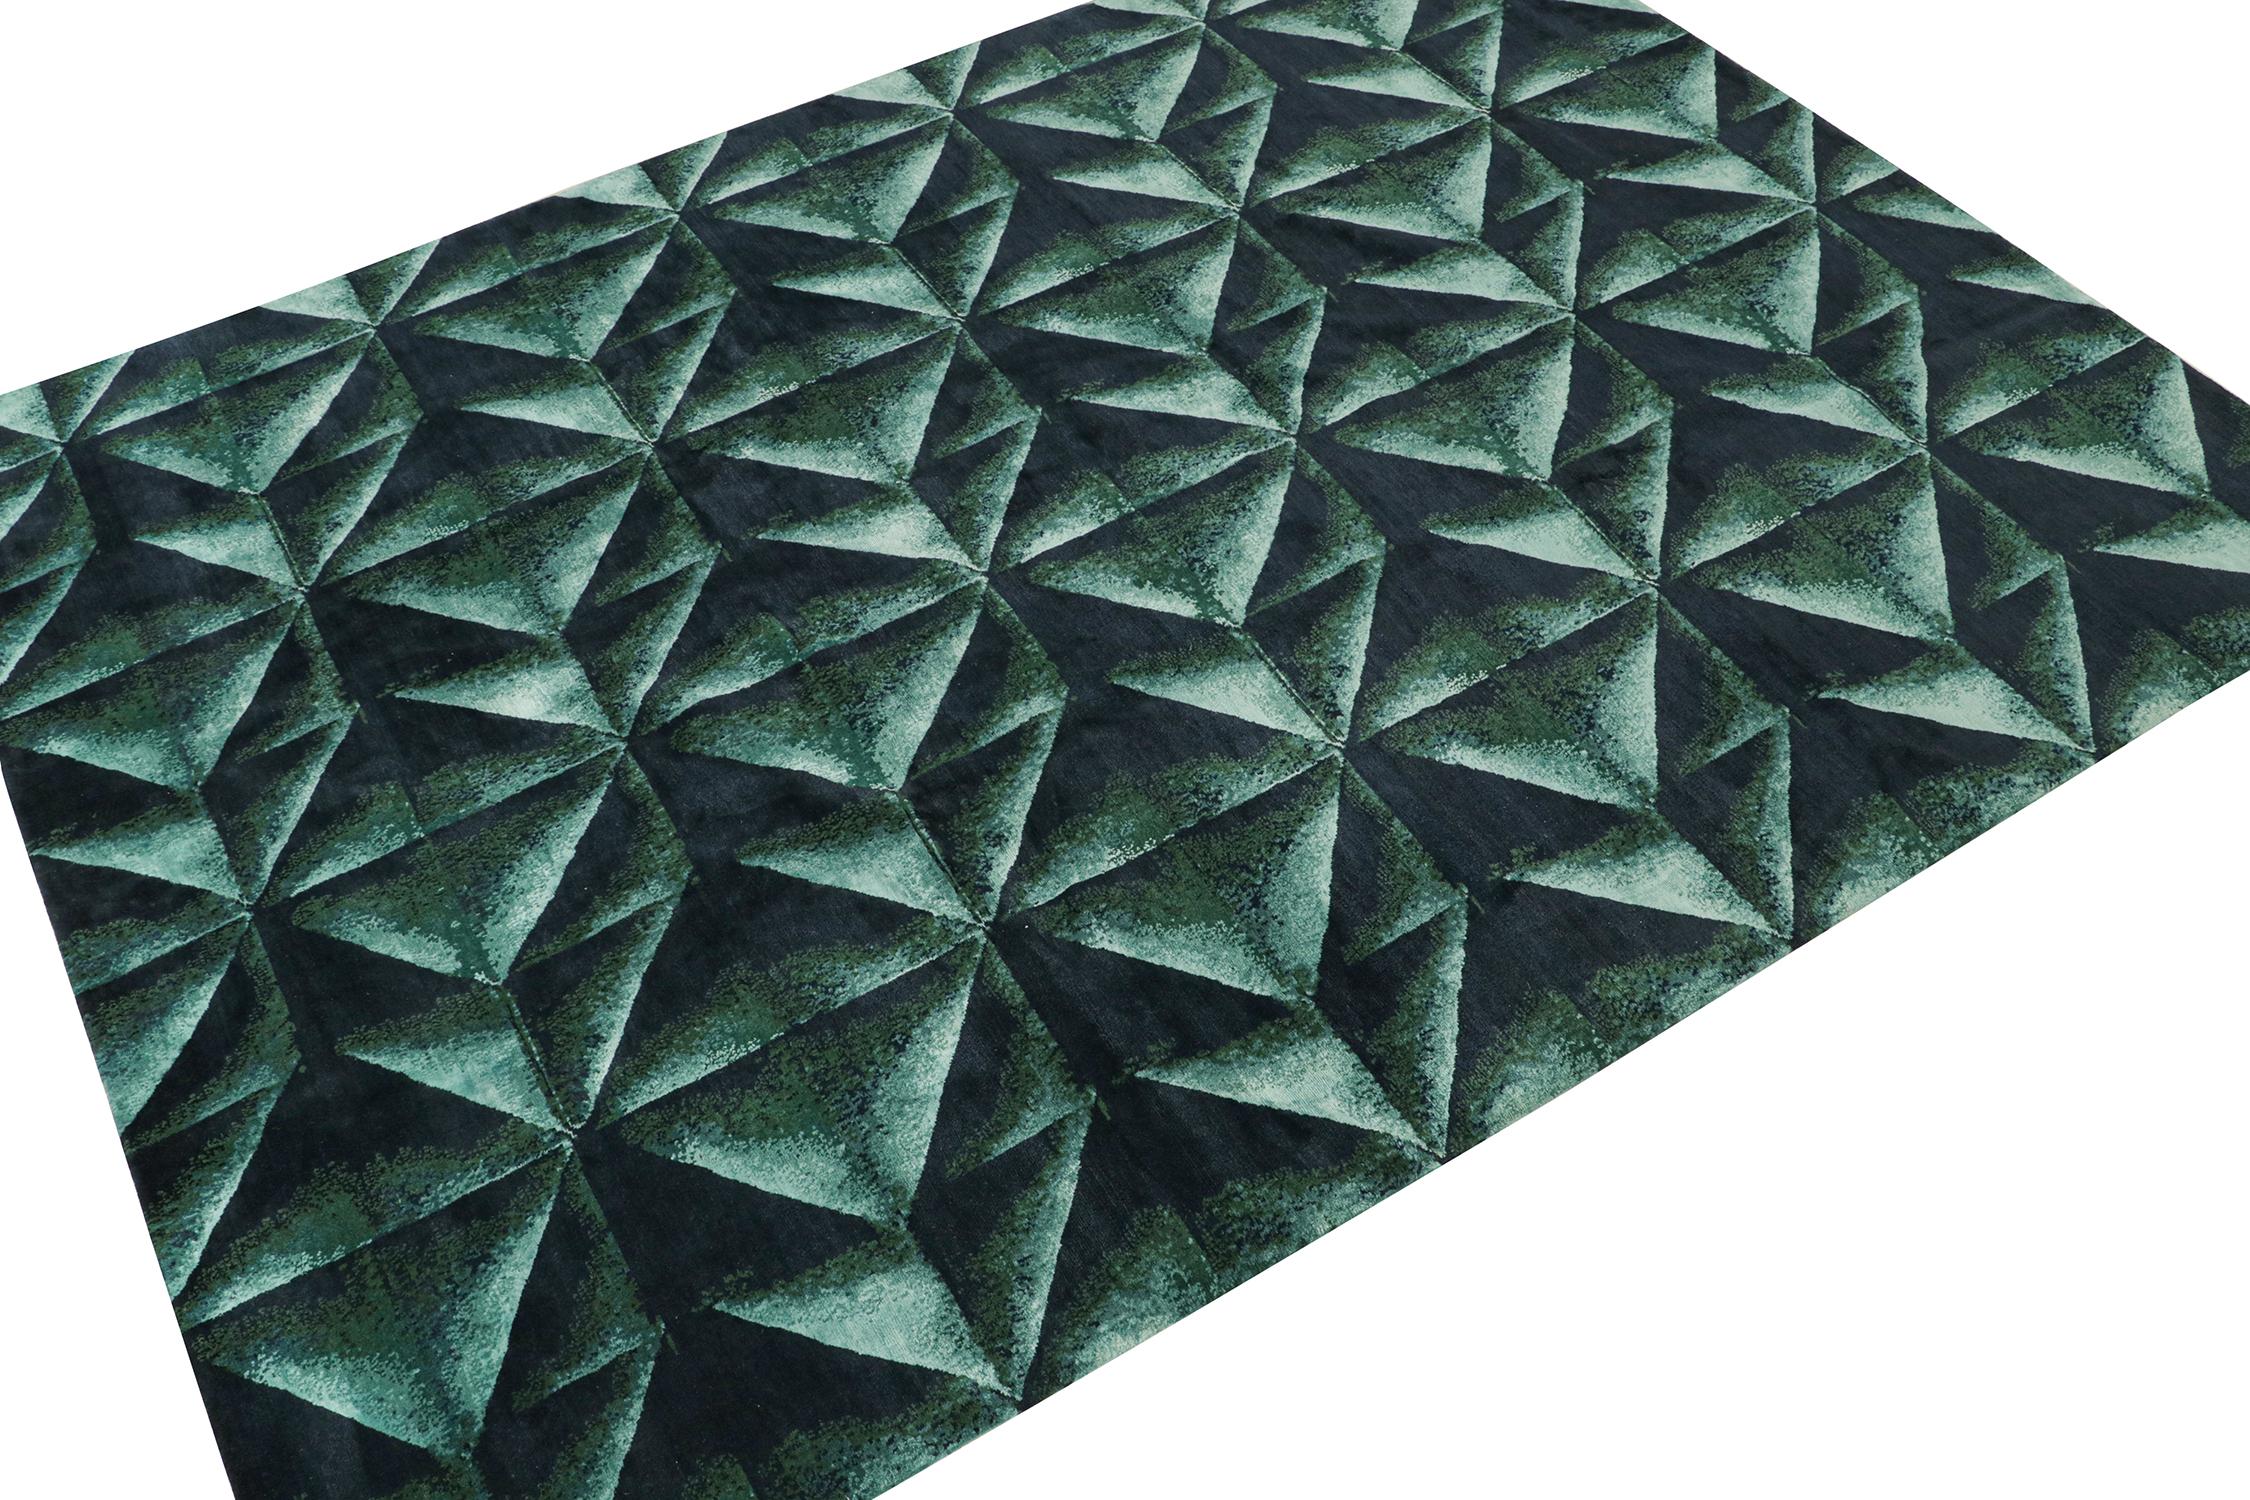 This 9x12 abstract rug is the next addition to Rug & Kilim’s bold modern rug designs. Hand-knotted in wool and silk.

Further on the Design: 

This piece draws inspiration from origami designs, and hosts a unique geometric pattern in teal and black.